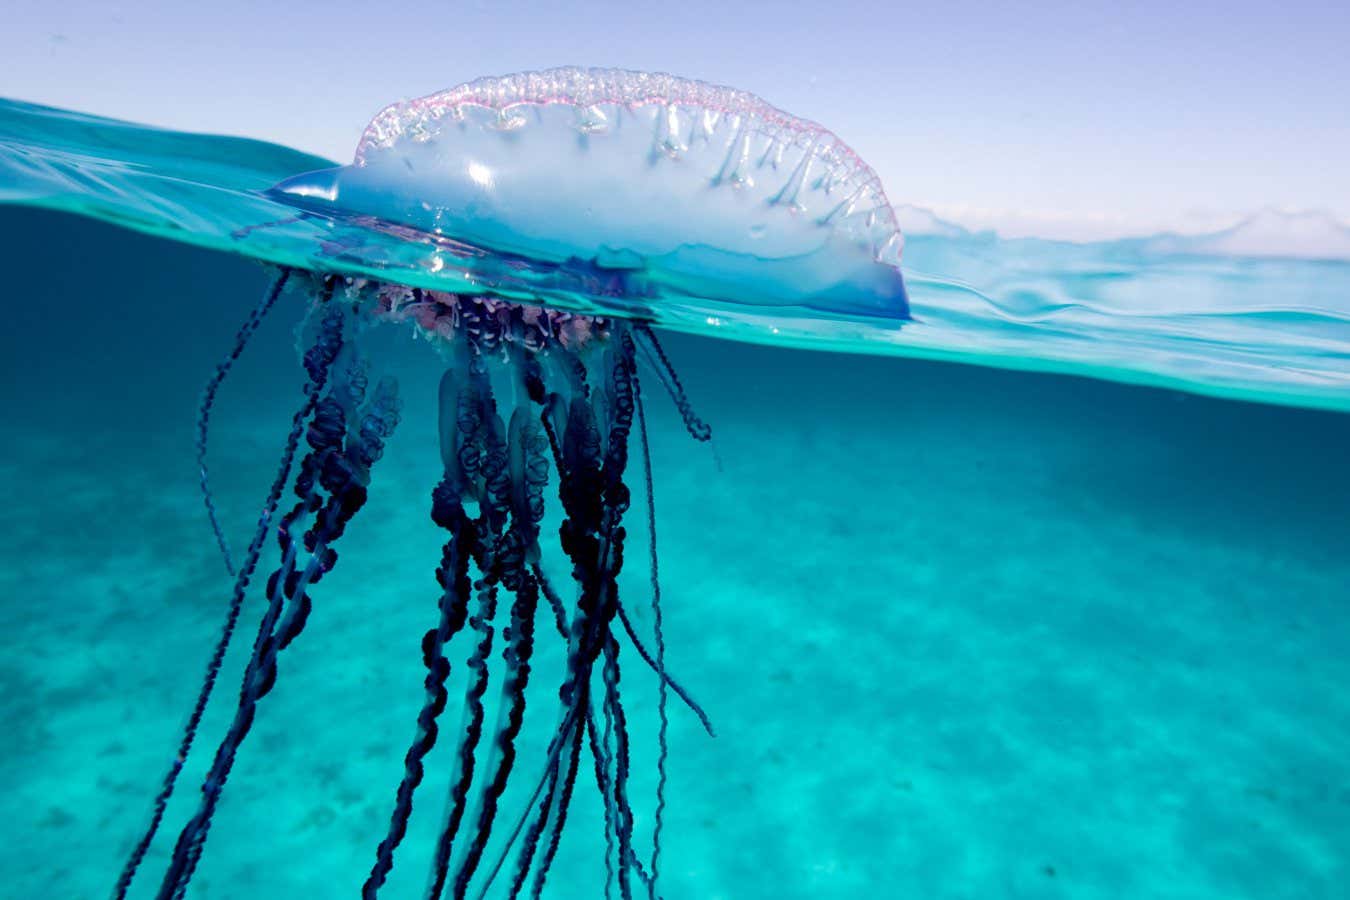 New species of Portuguese man o' war discovered in the Tasman Sea